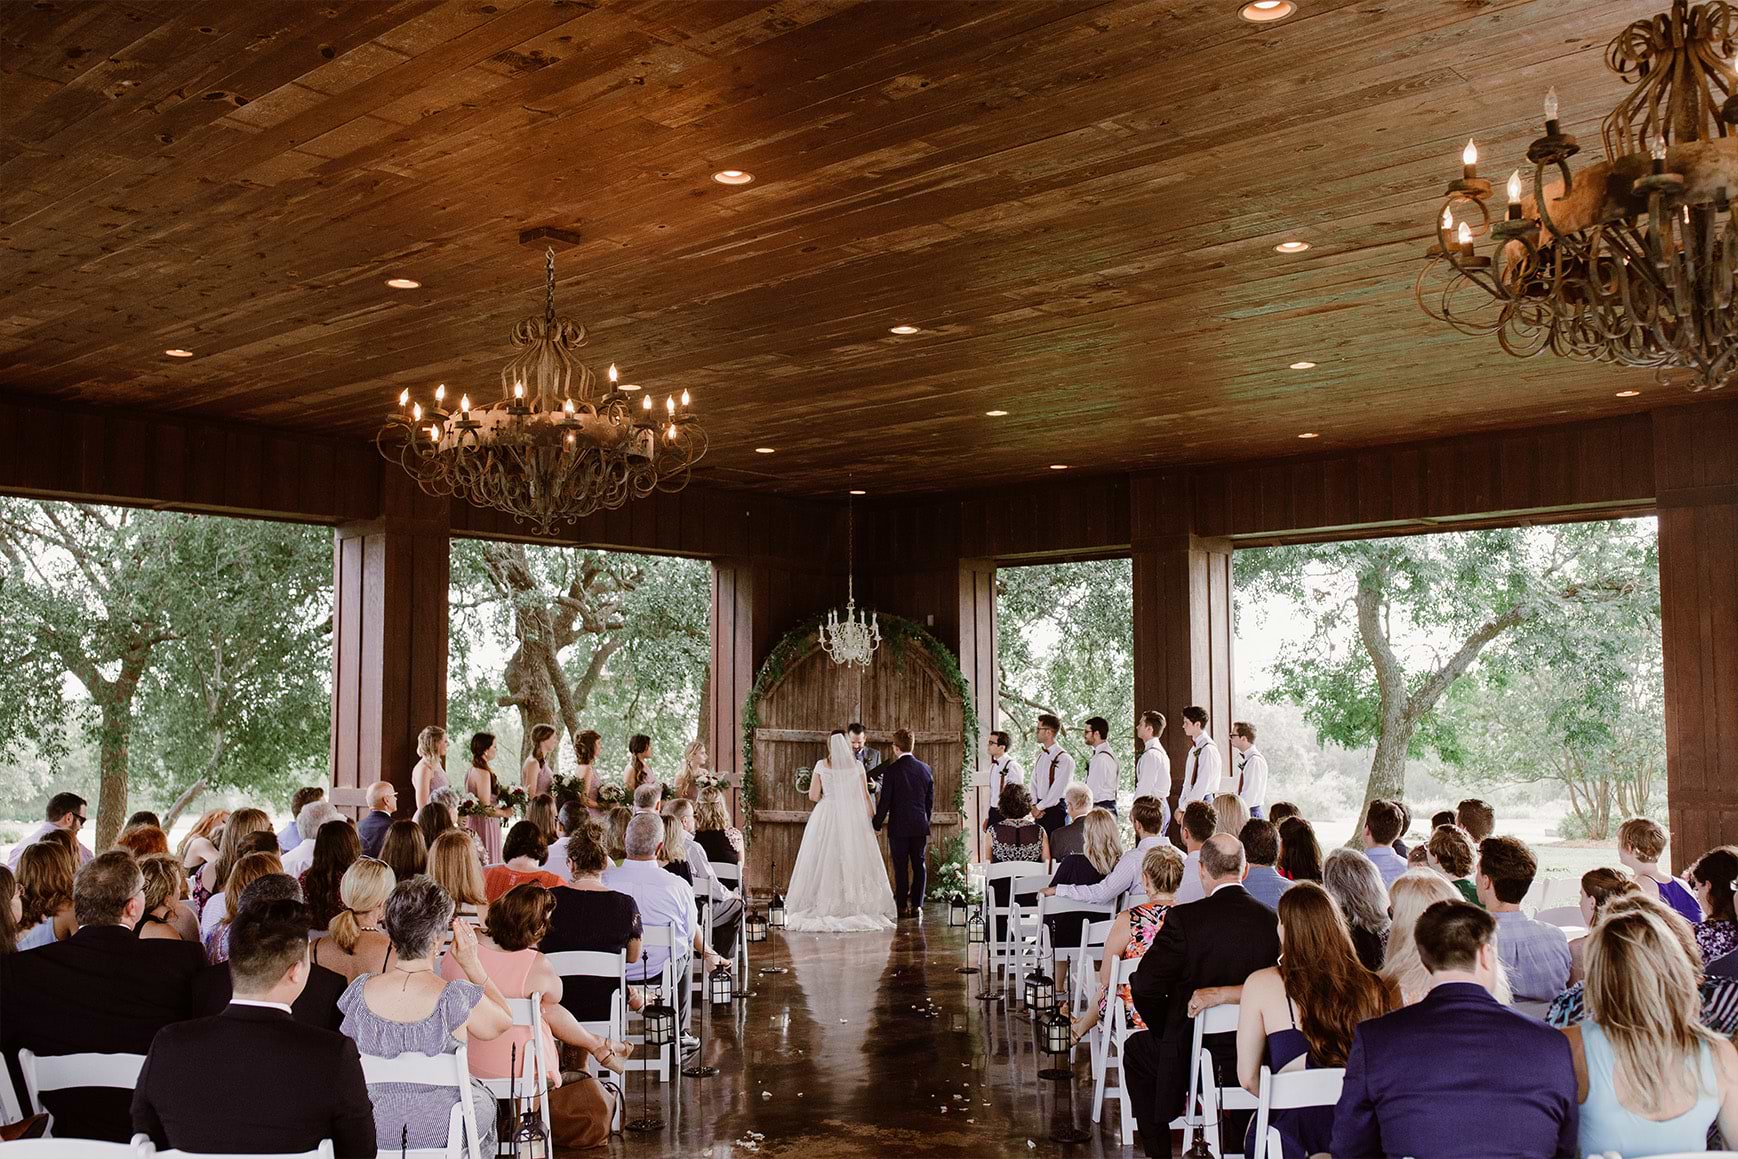 Hofmann Ranch is a Texas wedding venue with an open-air pavilion for wedding receptions